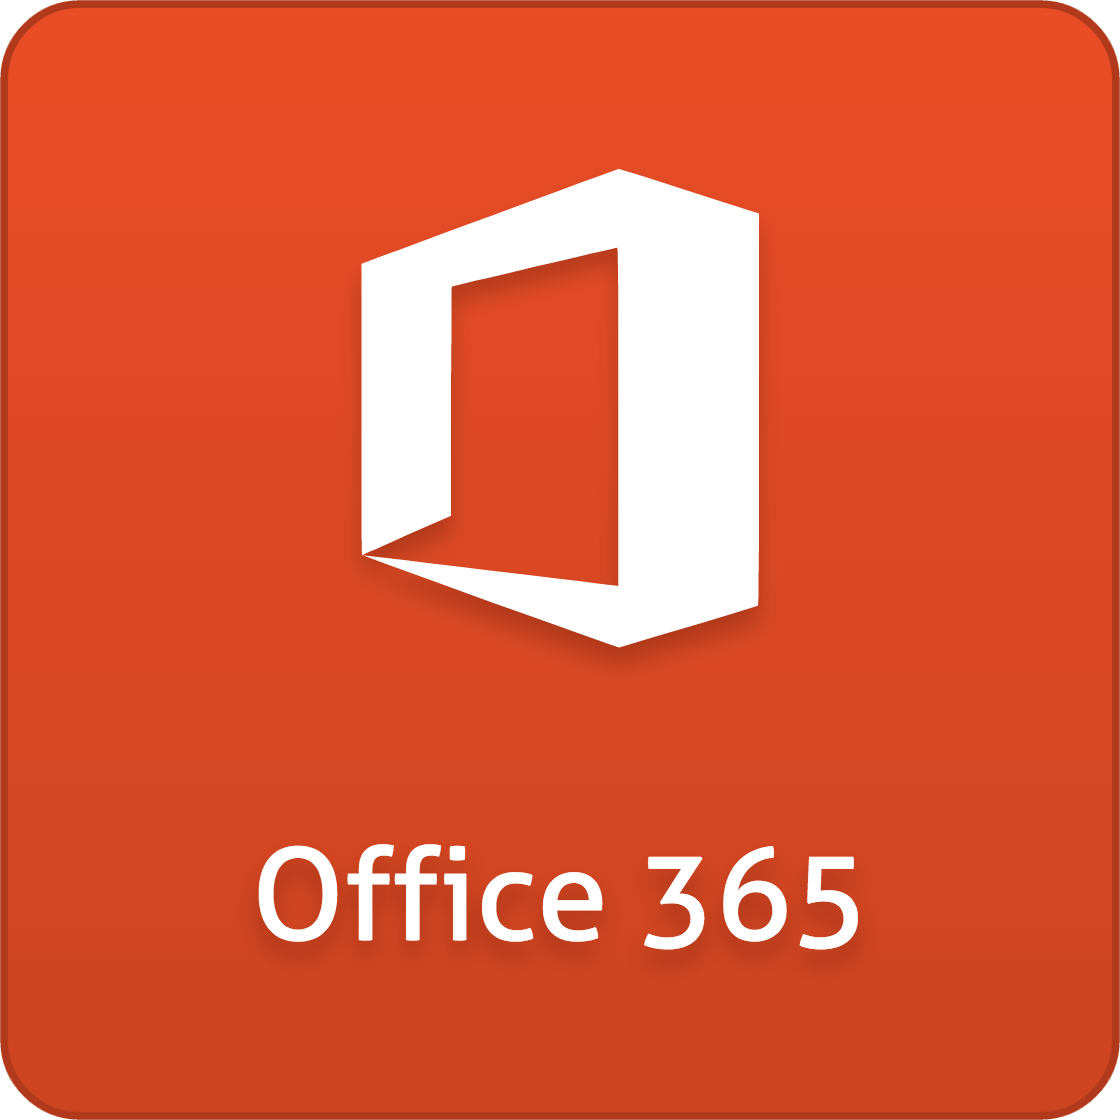 Office Mobile Apps Logo - Now fully available for your school - Office 365 integration